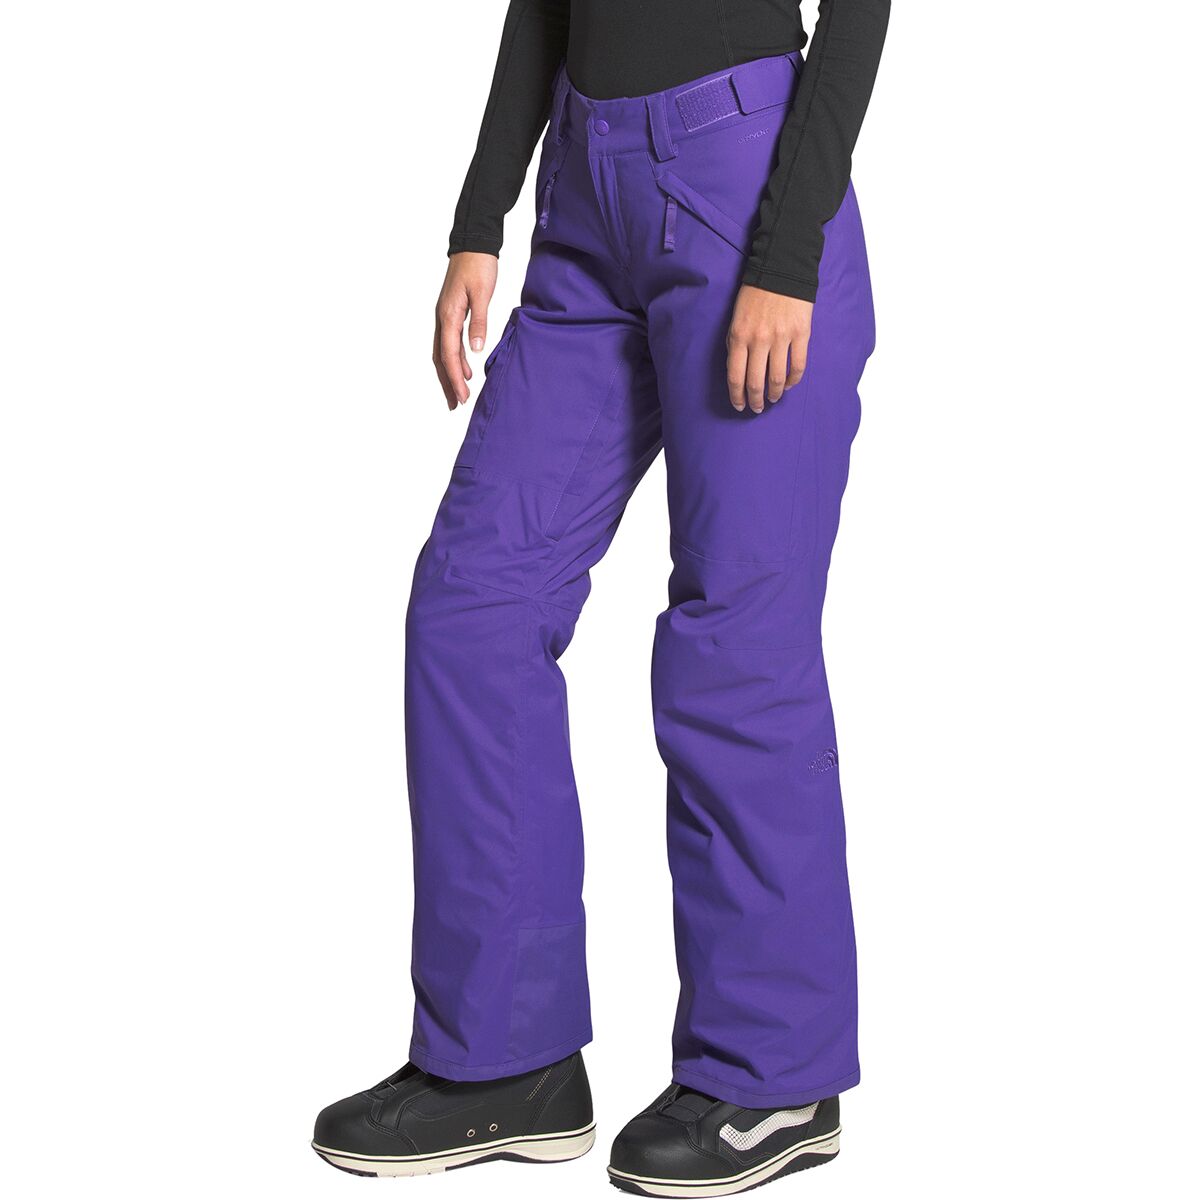 tnf freedom insulated pant